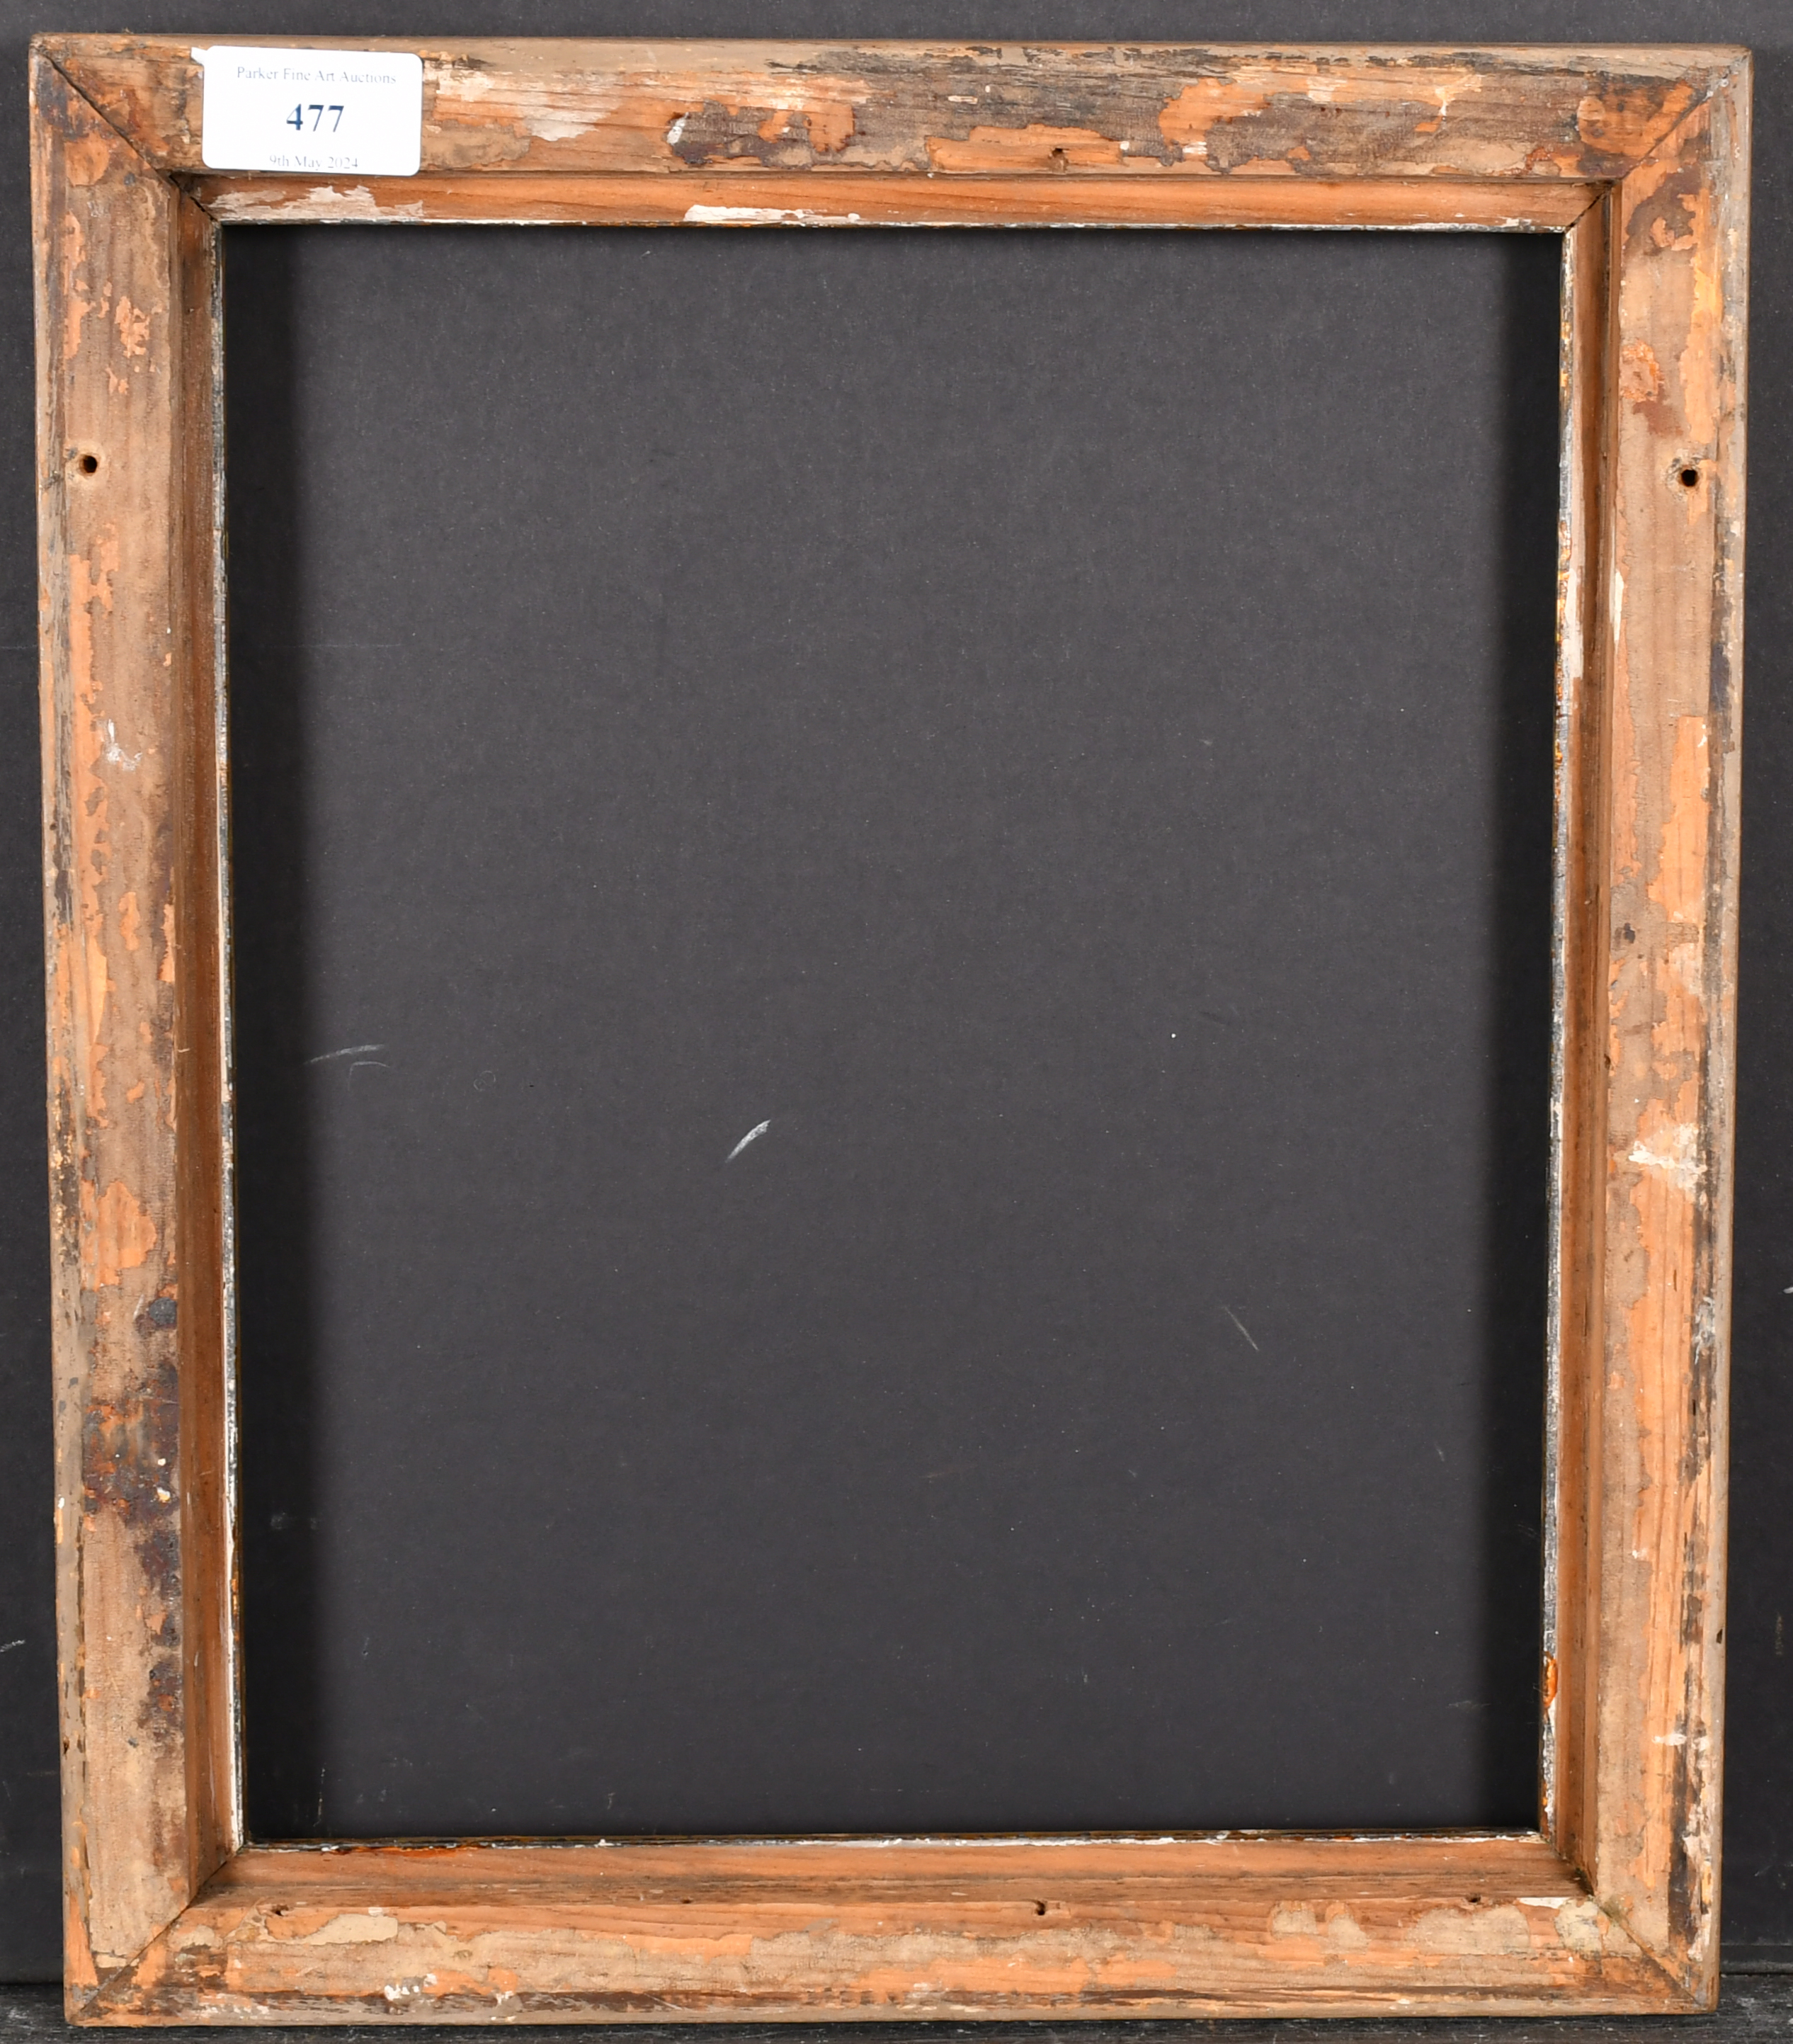 19th Century English School. A Ribbed Composition Frame, rebate 12" x 10" (30.5 x 25.4cm) - Image 3 of 3